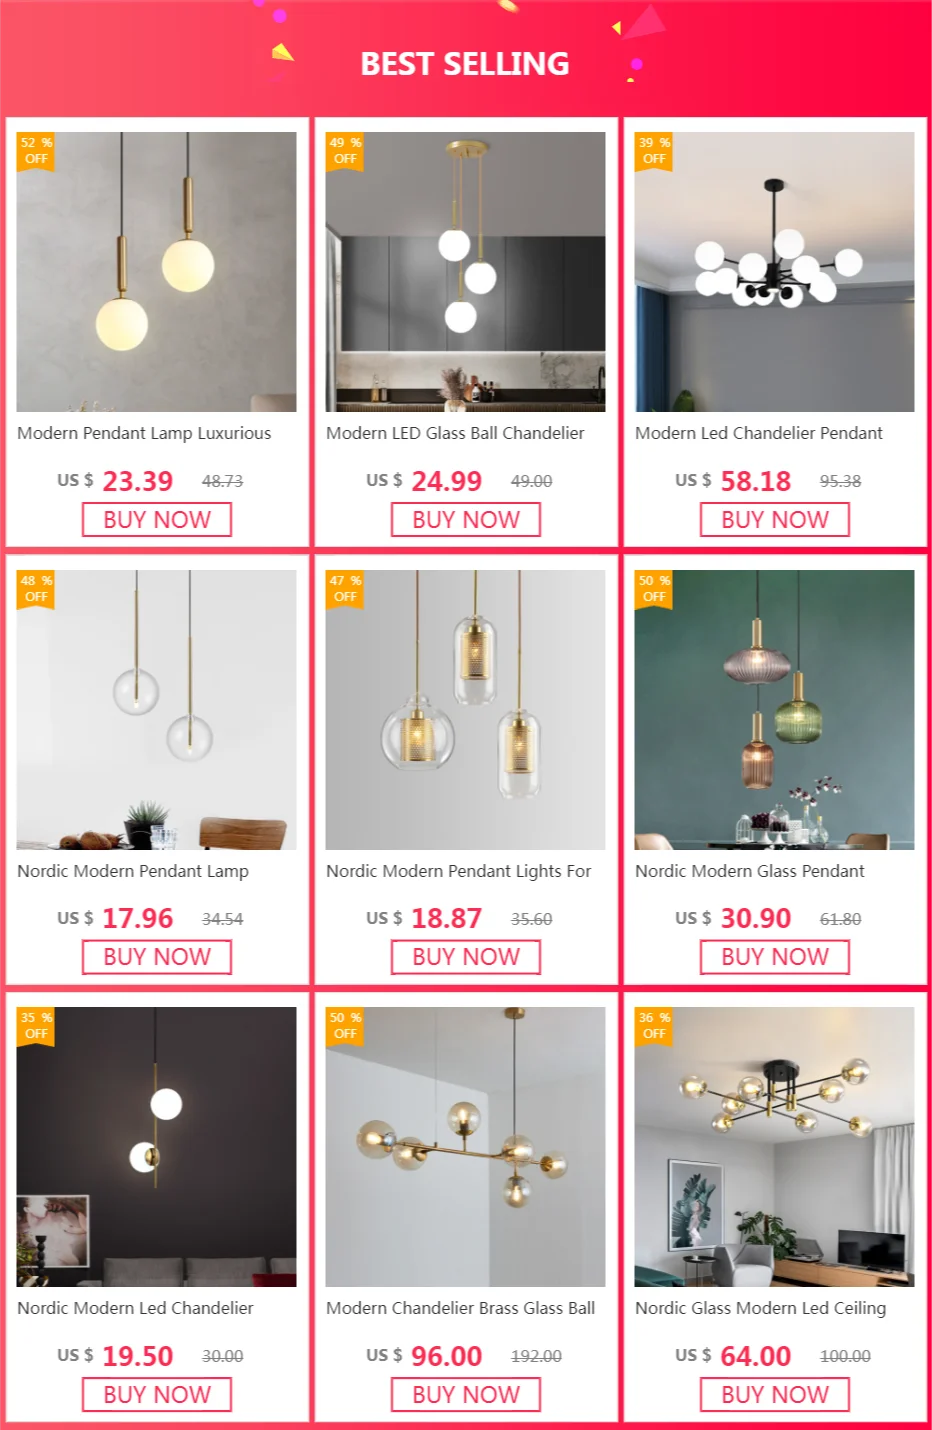 Sb8c613213e6a448ab4d95b6006e400edd Modern Pendant Lamp Luxurious Gold Glass Ball Lampshade Hanging Lights Fixtures For Dining Room Bedroom Decoration Lighting